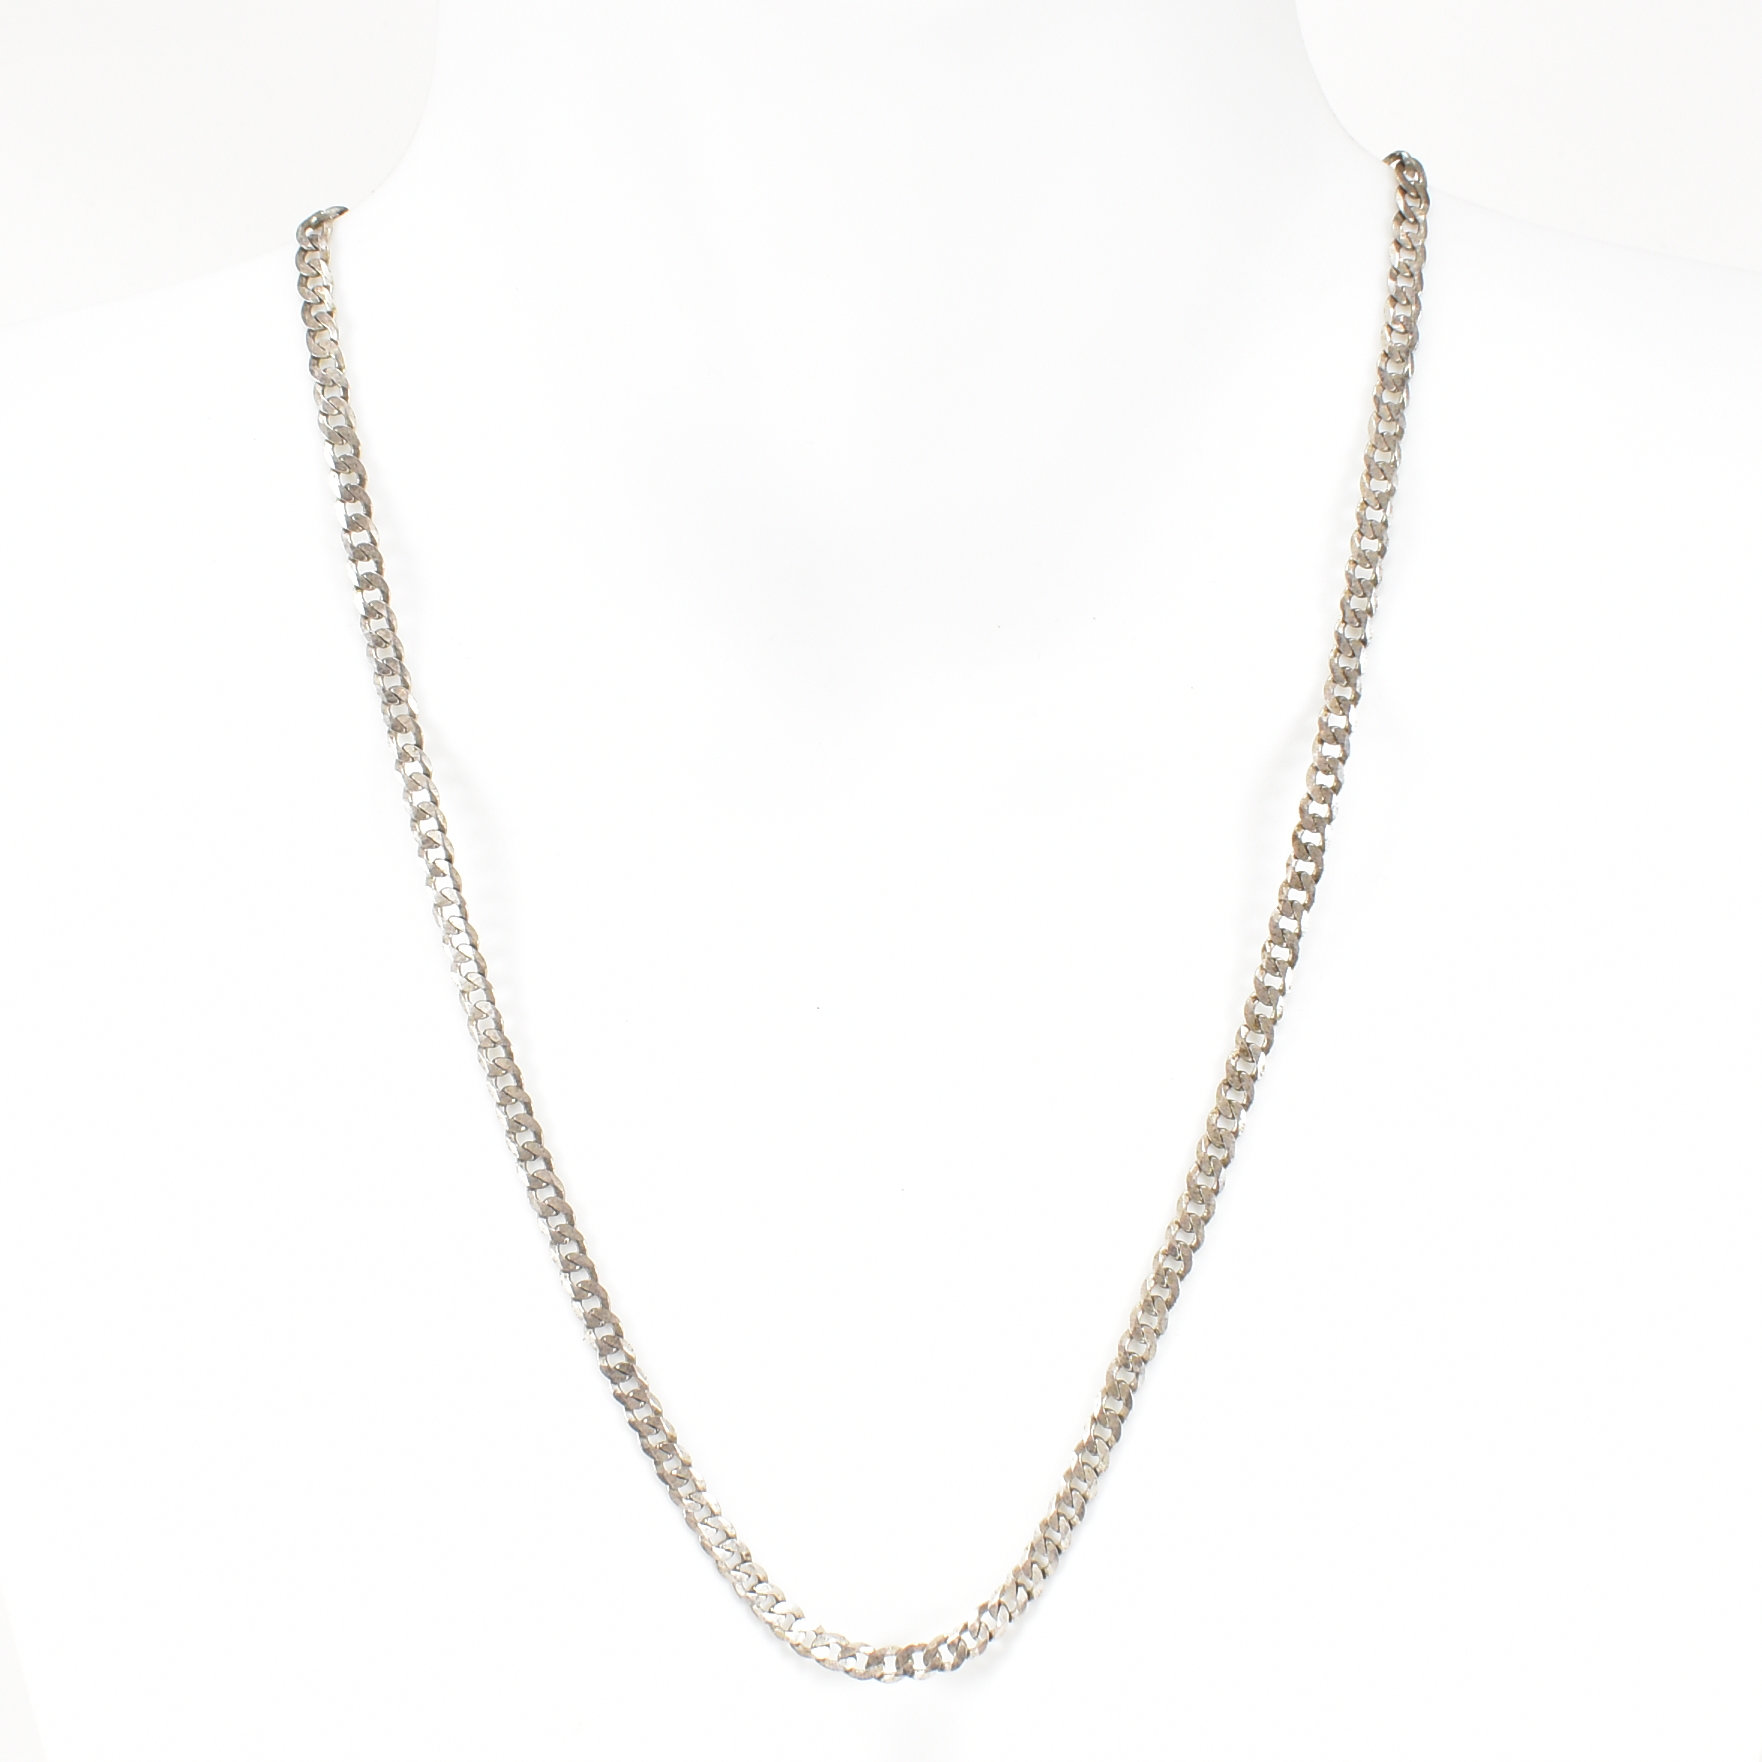 TWO 925 SILVER CURB LINK CHAIN NECKLACES - Image 2 of 6